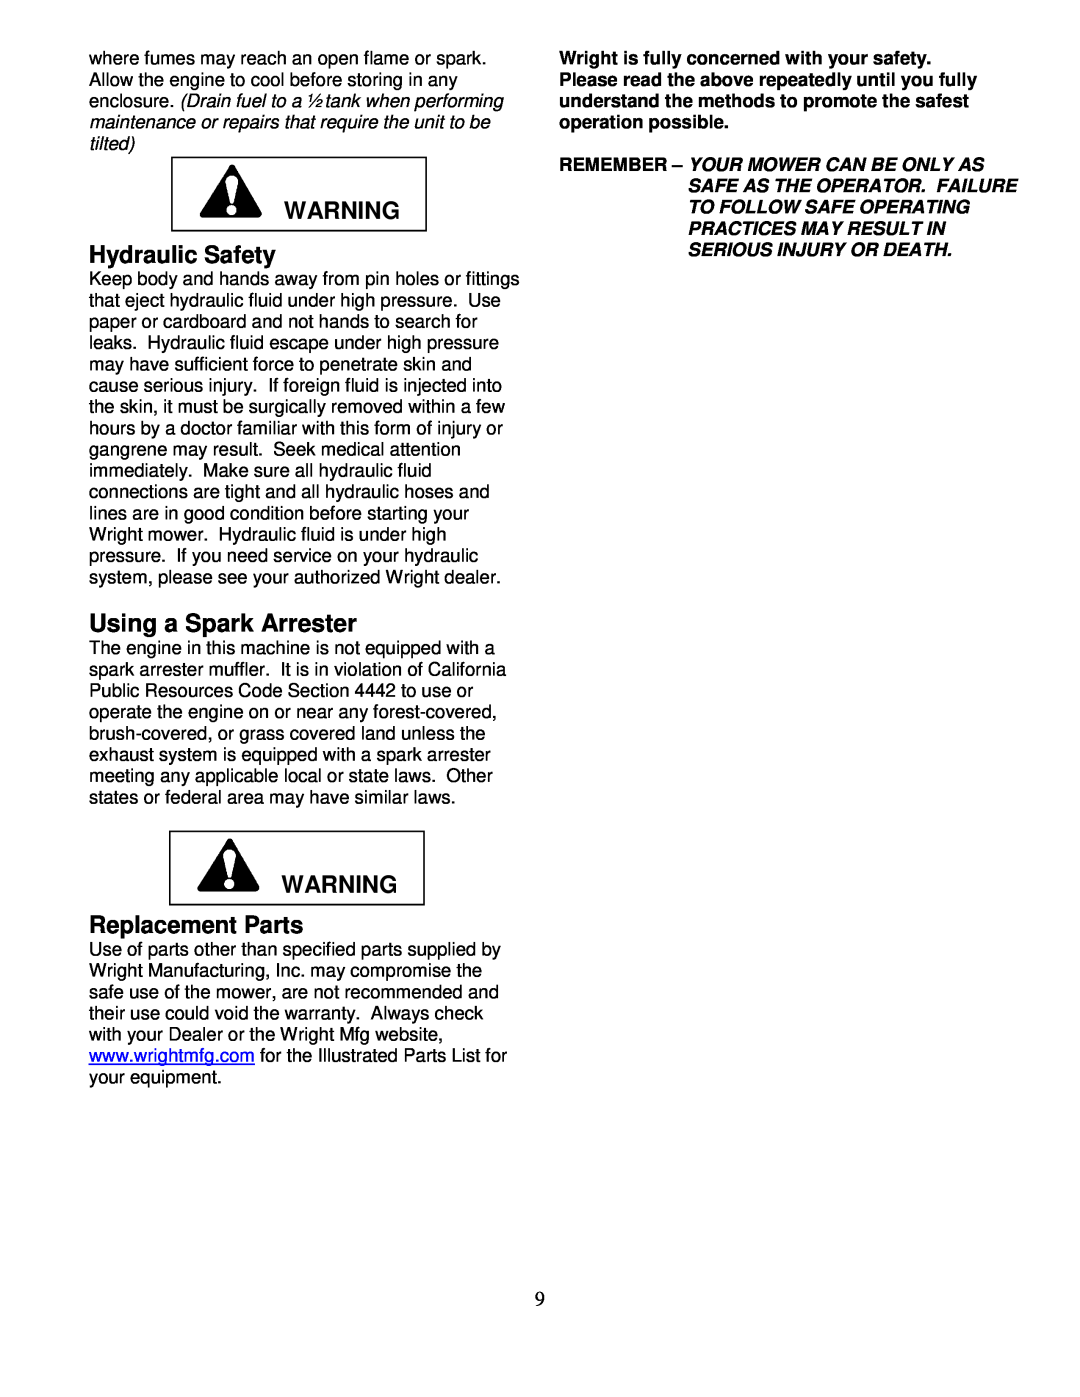 Wright Manufacturing 14SH654 owner manual Using a Spark Arrester, Hydraulic Safety, Replacement Parts 